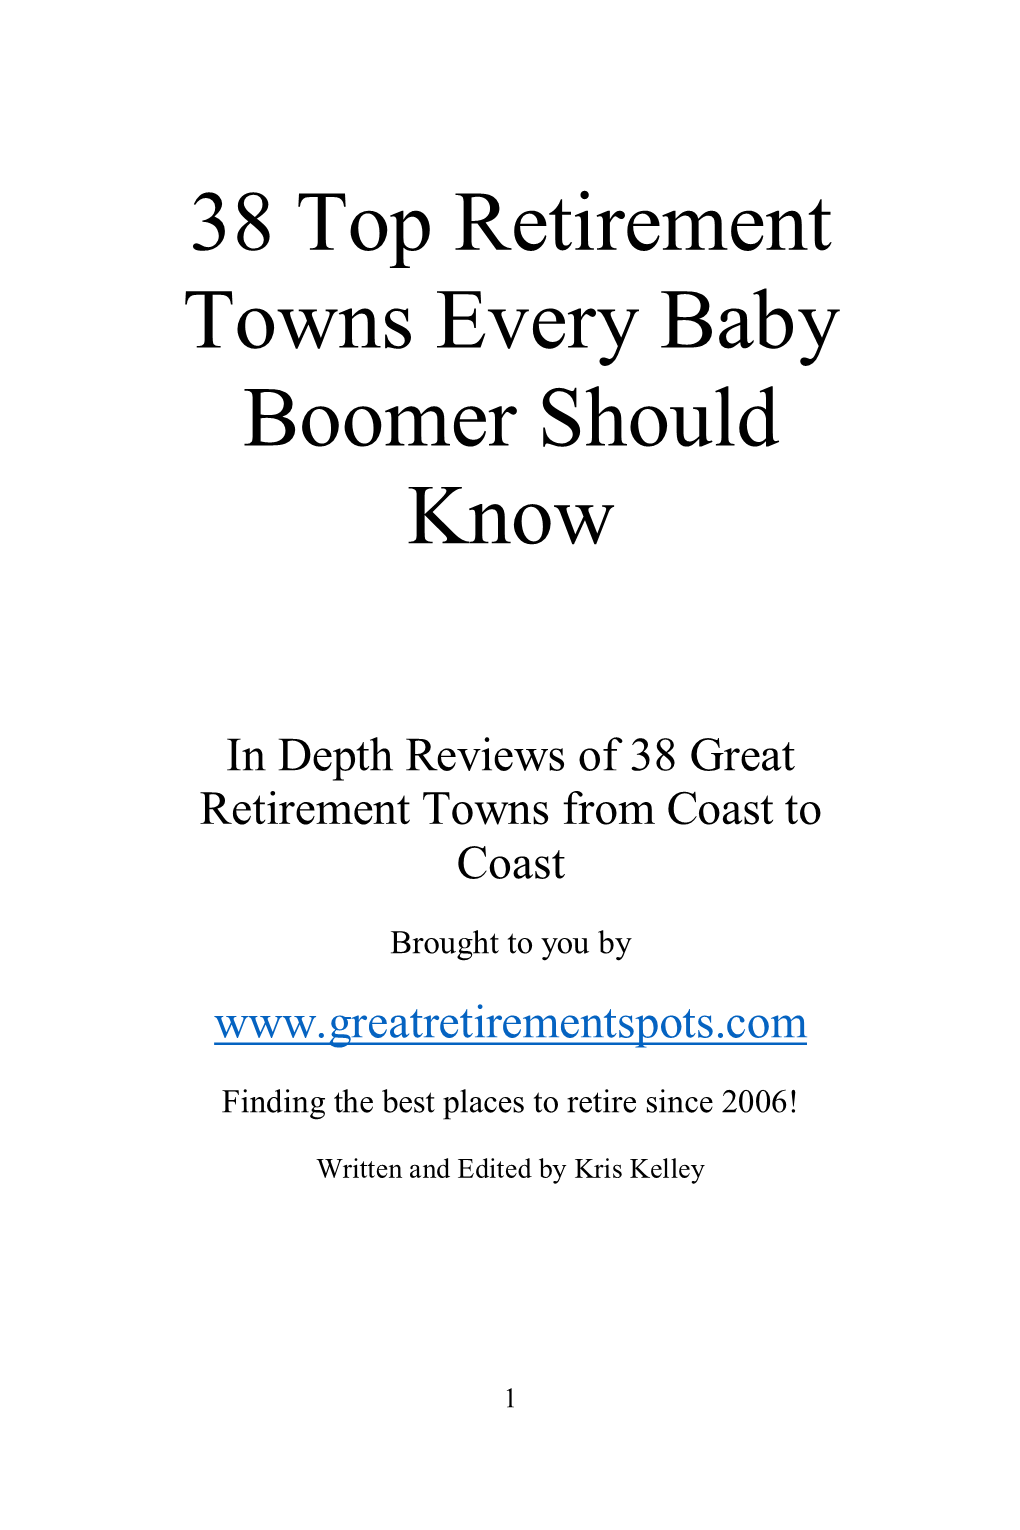 38 Top Retirement Towns Every Baby Boomer Should Know